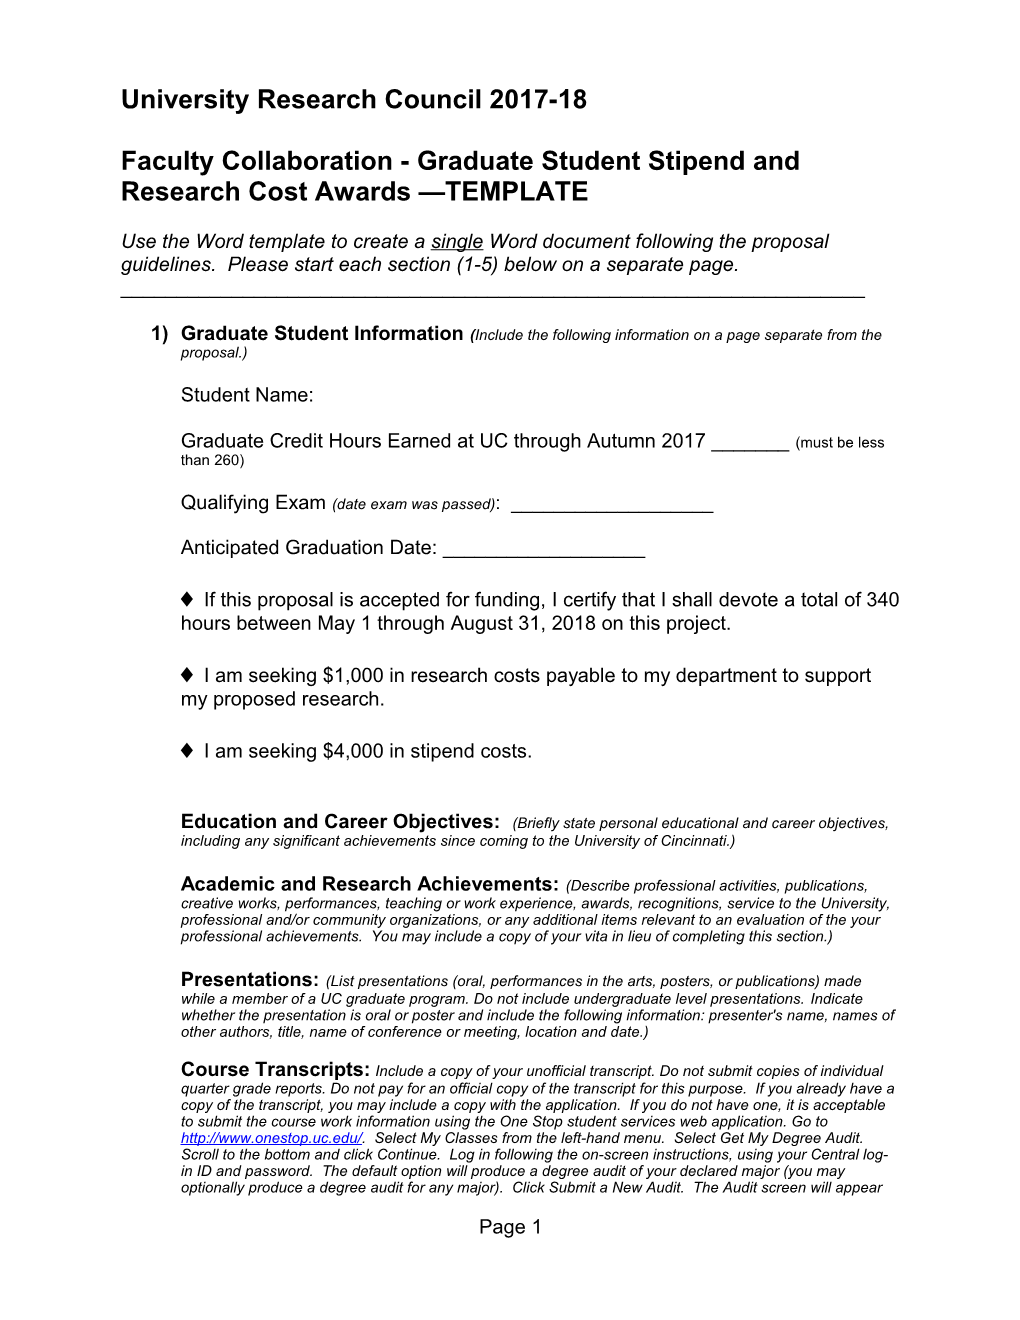 Faculty Collaboration - Graduate Student Stipend and Research Cost Awards TEMPLATE